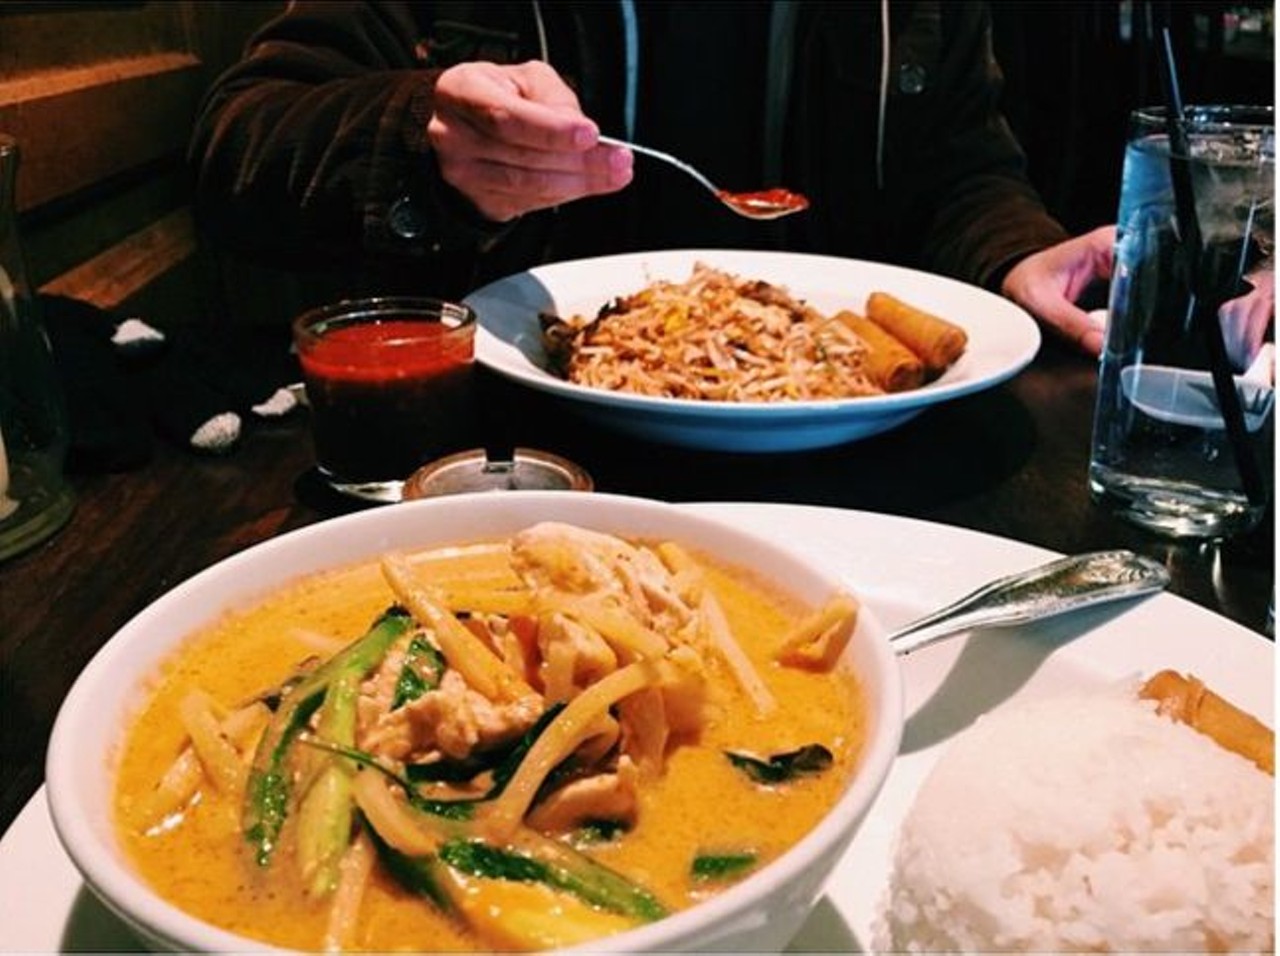 Thai Dee Restaurant
5307 Blanco Road,  (210) 342-3622
For excellent Thai food and a place where you can BYOB, Thai Dee is our favorite spot.
Photo via Instagram, iheartcupcakephoto